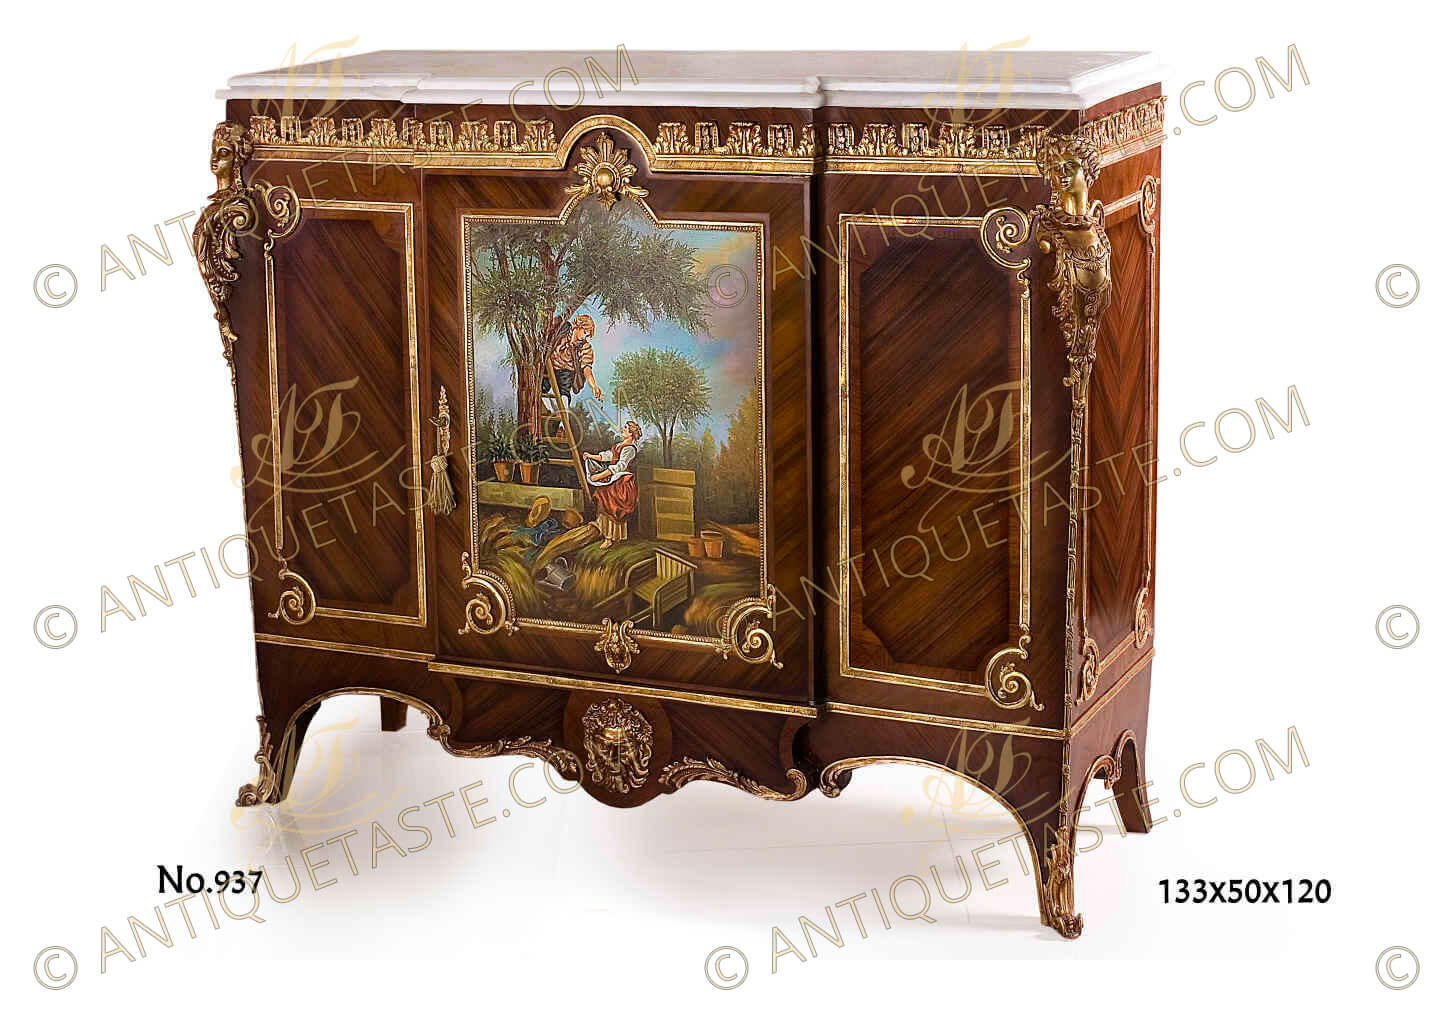 A Very fine ormolu mounted Louis XV and Vernis Martin style sans traverse veneer inlaid Meuble À hauteur d'appui after the model by Joseph Emmanuel Zwiener, late 19th century